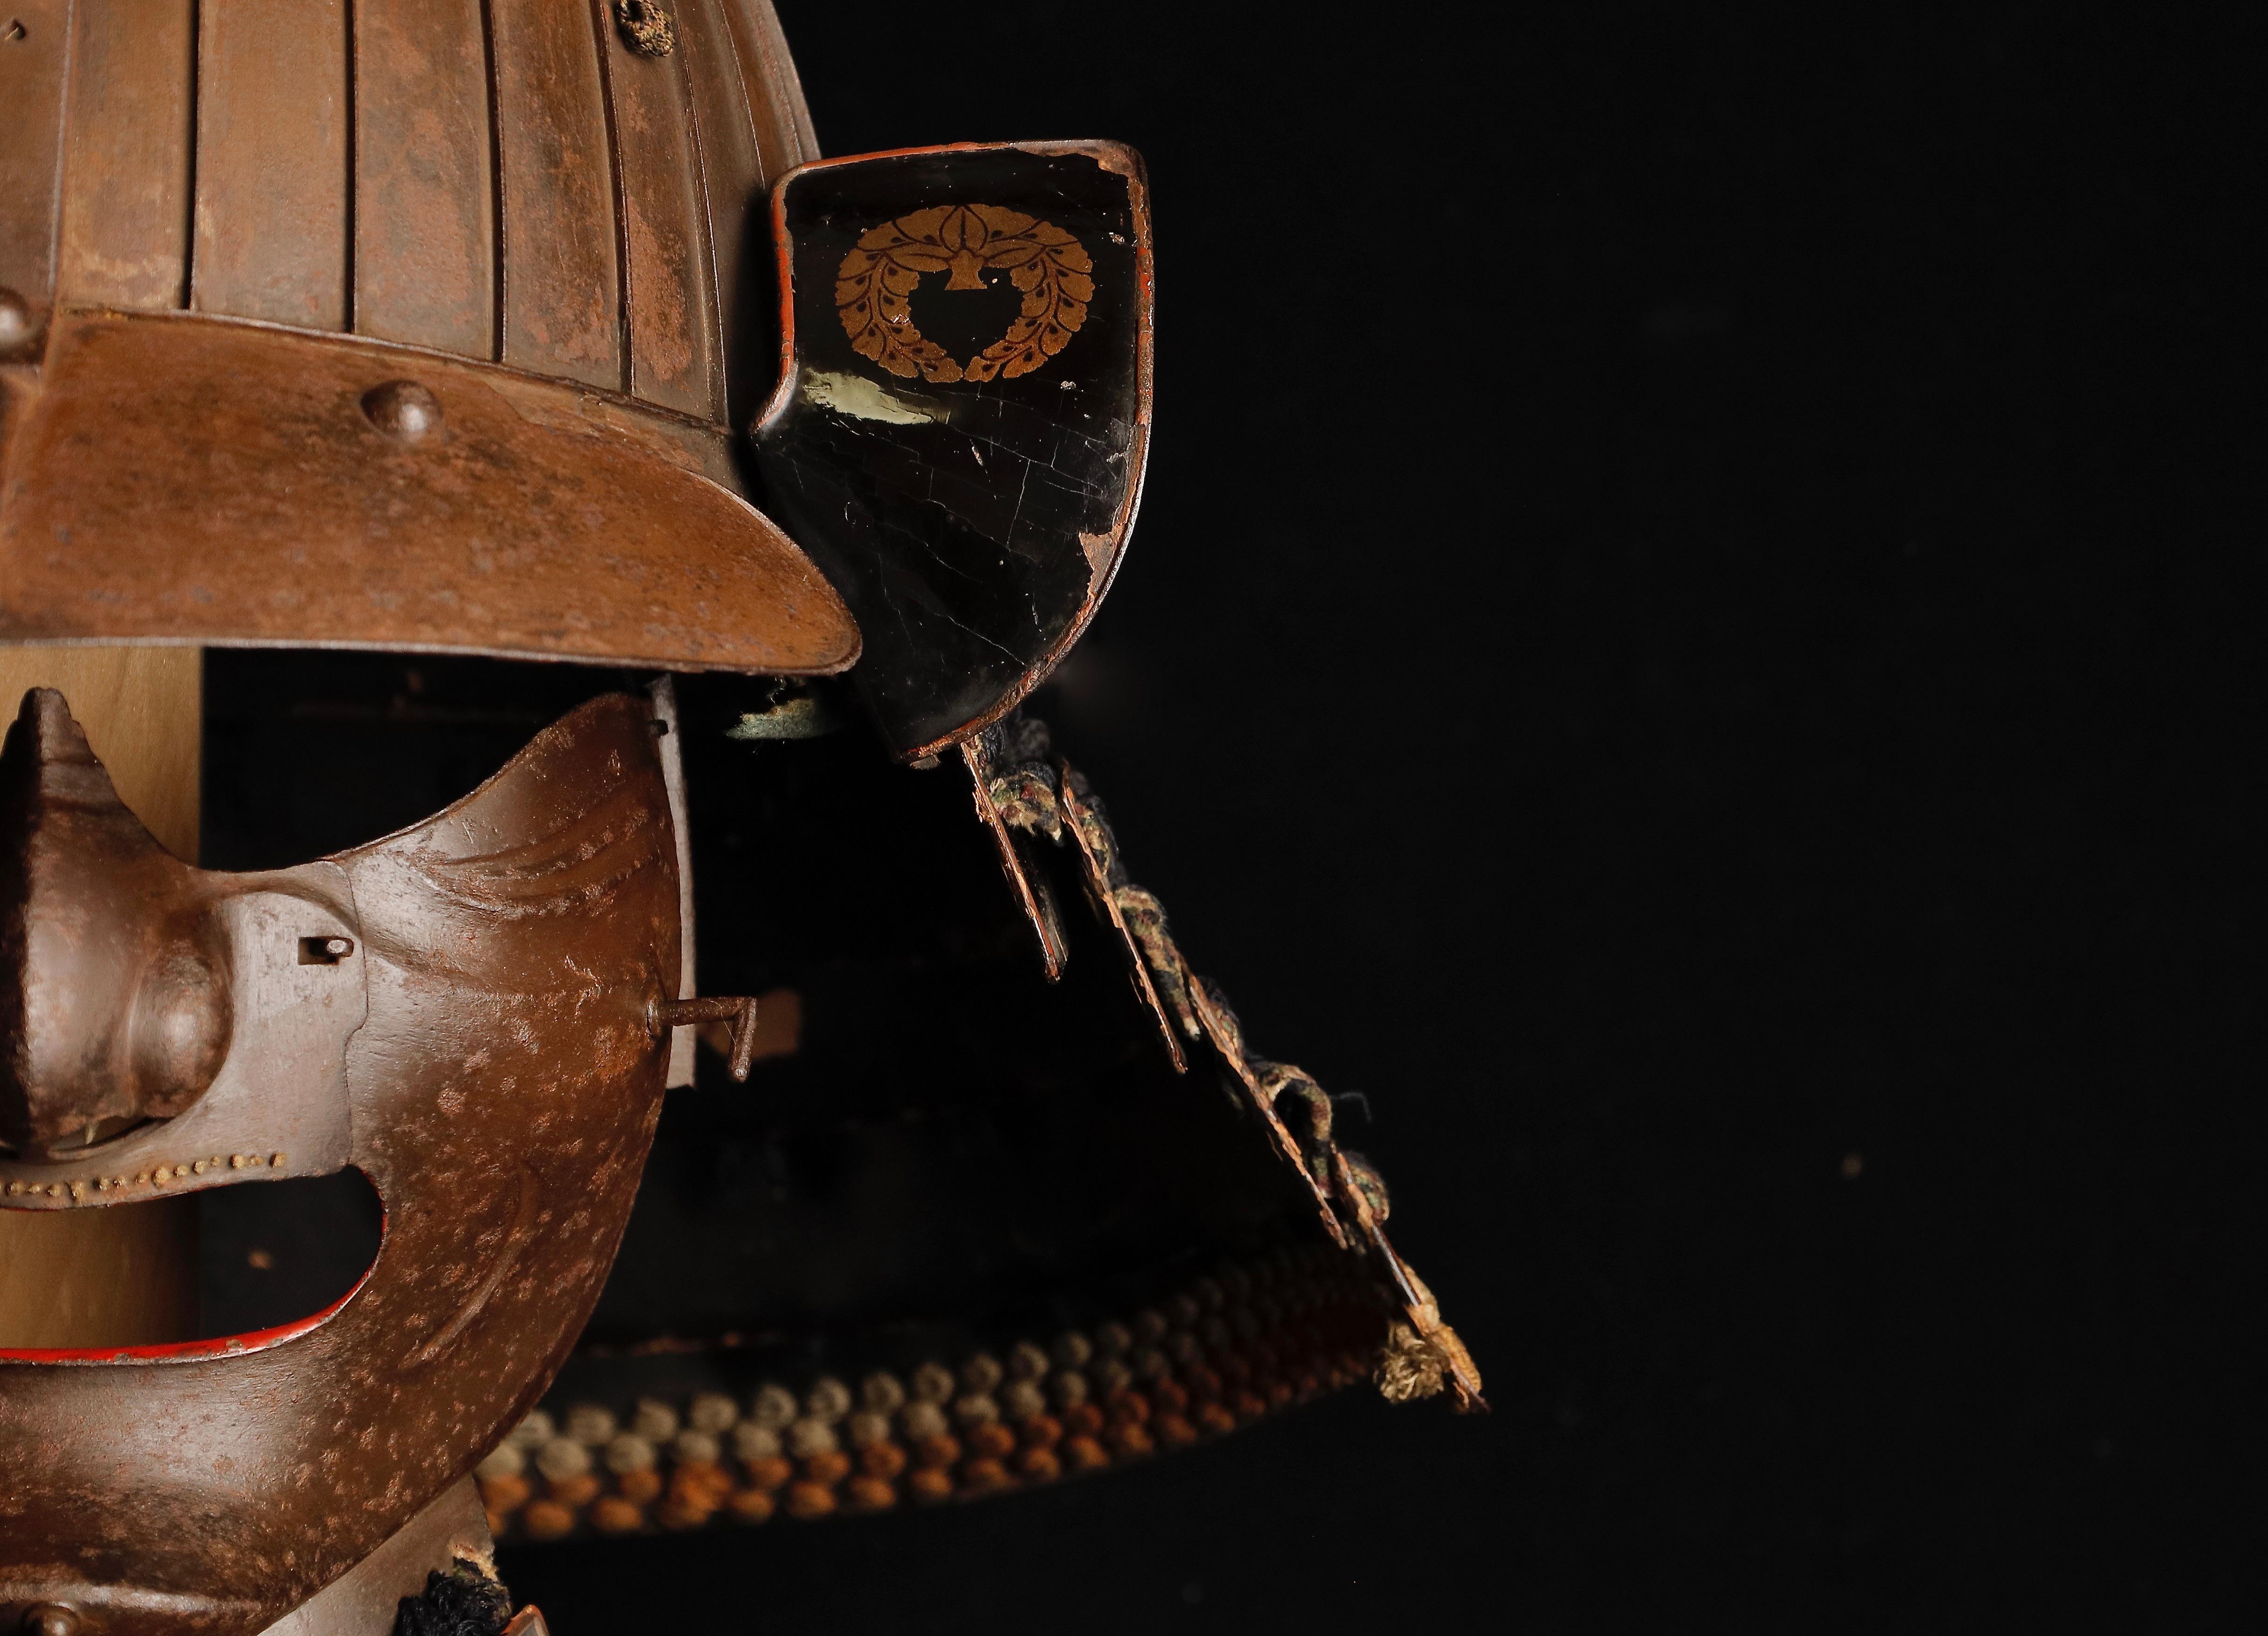 Exceptional Samurai Kabuto and Menpo set from the Edo period (17-18th century). This set includes a 32-plate Suji Kabuto (helmet) and a Menpo (mask) that match perfectly to create an impressive and fearsome image of a samurai warrior. The Kabuto